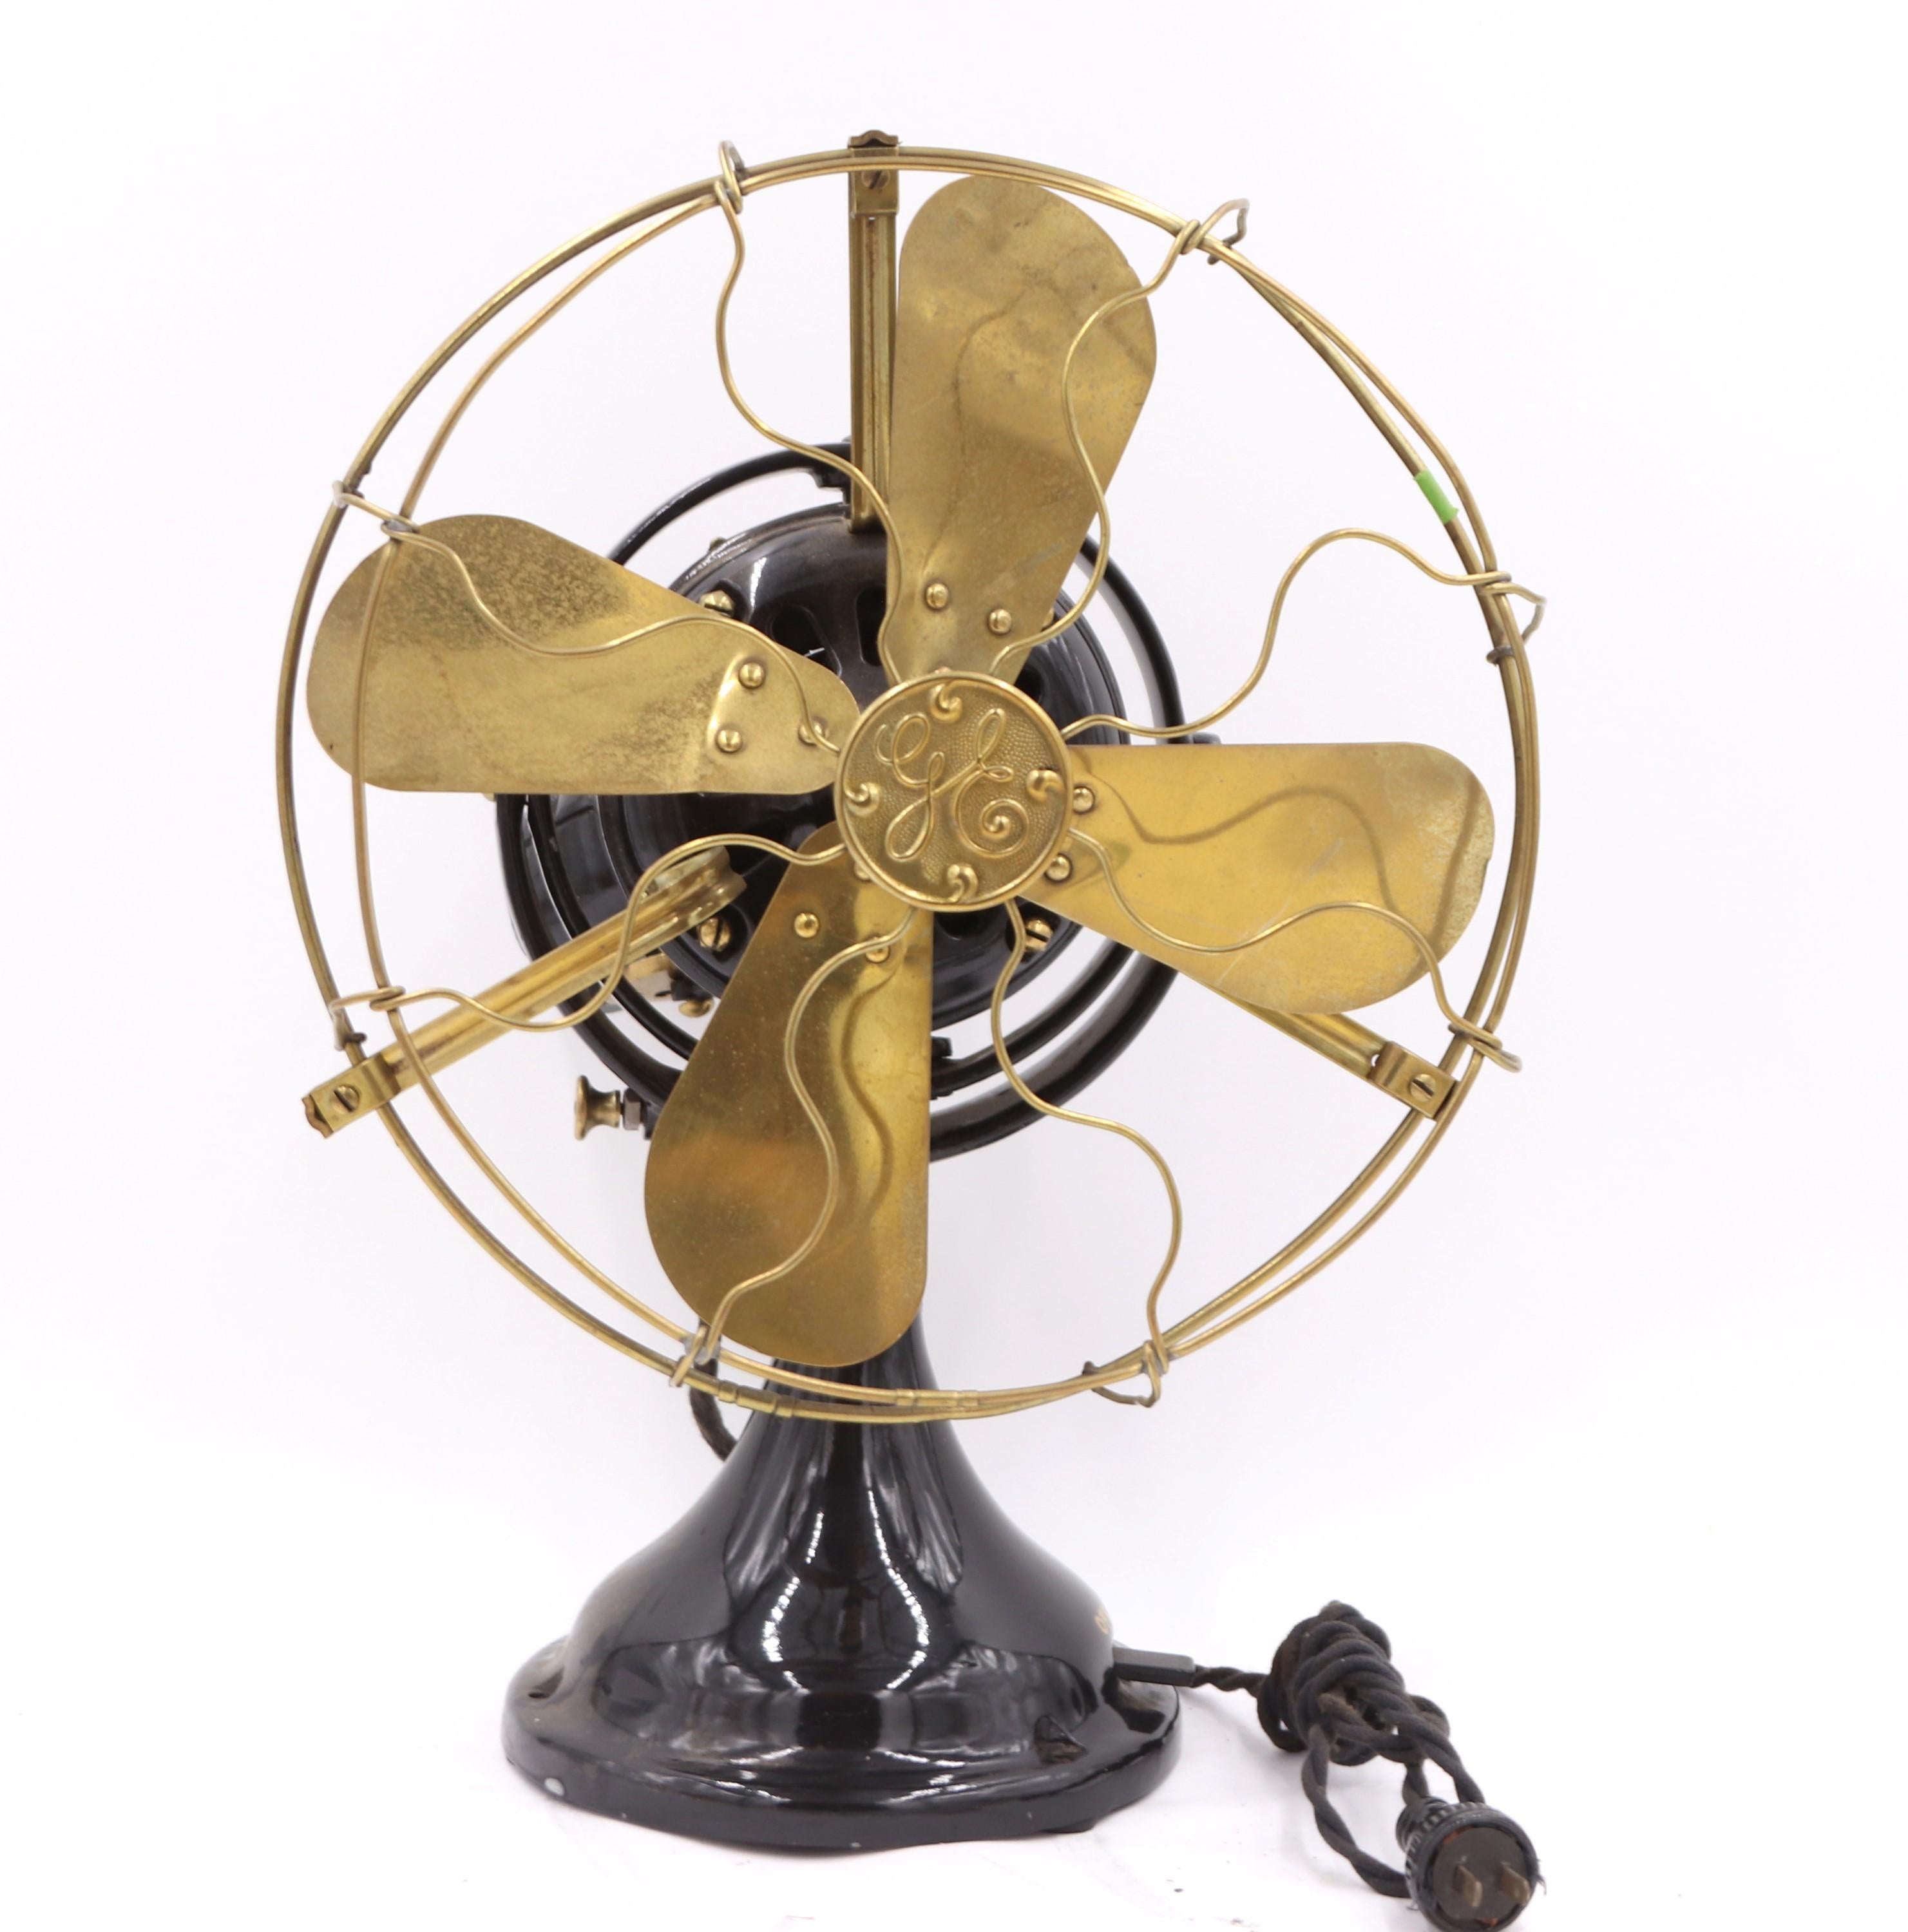 Early 1900s General Electric desk fan with polished brass blades and black base. Made by General Electric. The GE label indicates it was patented in 1901. It runs well but does not oscillate. There is some damage to the back. Please see the photos.